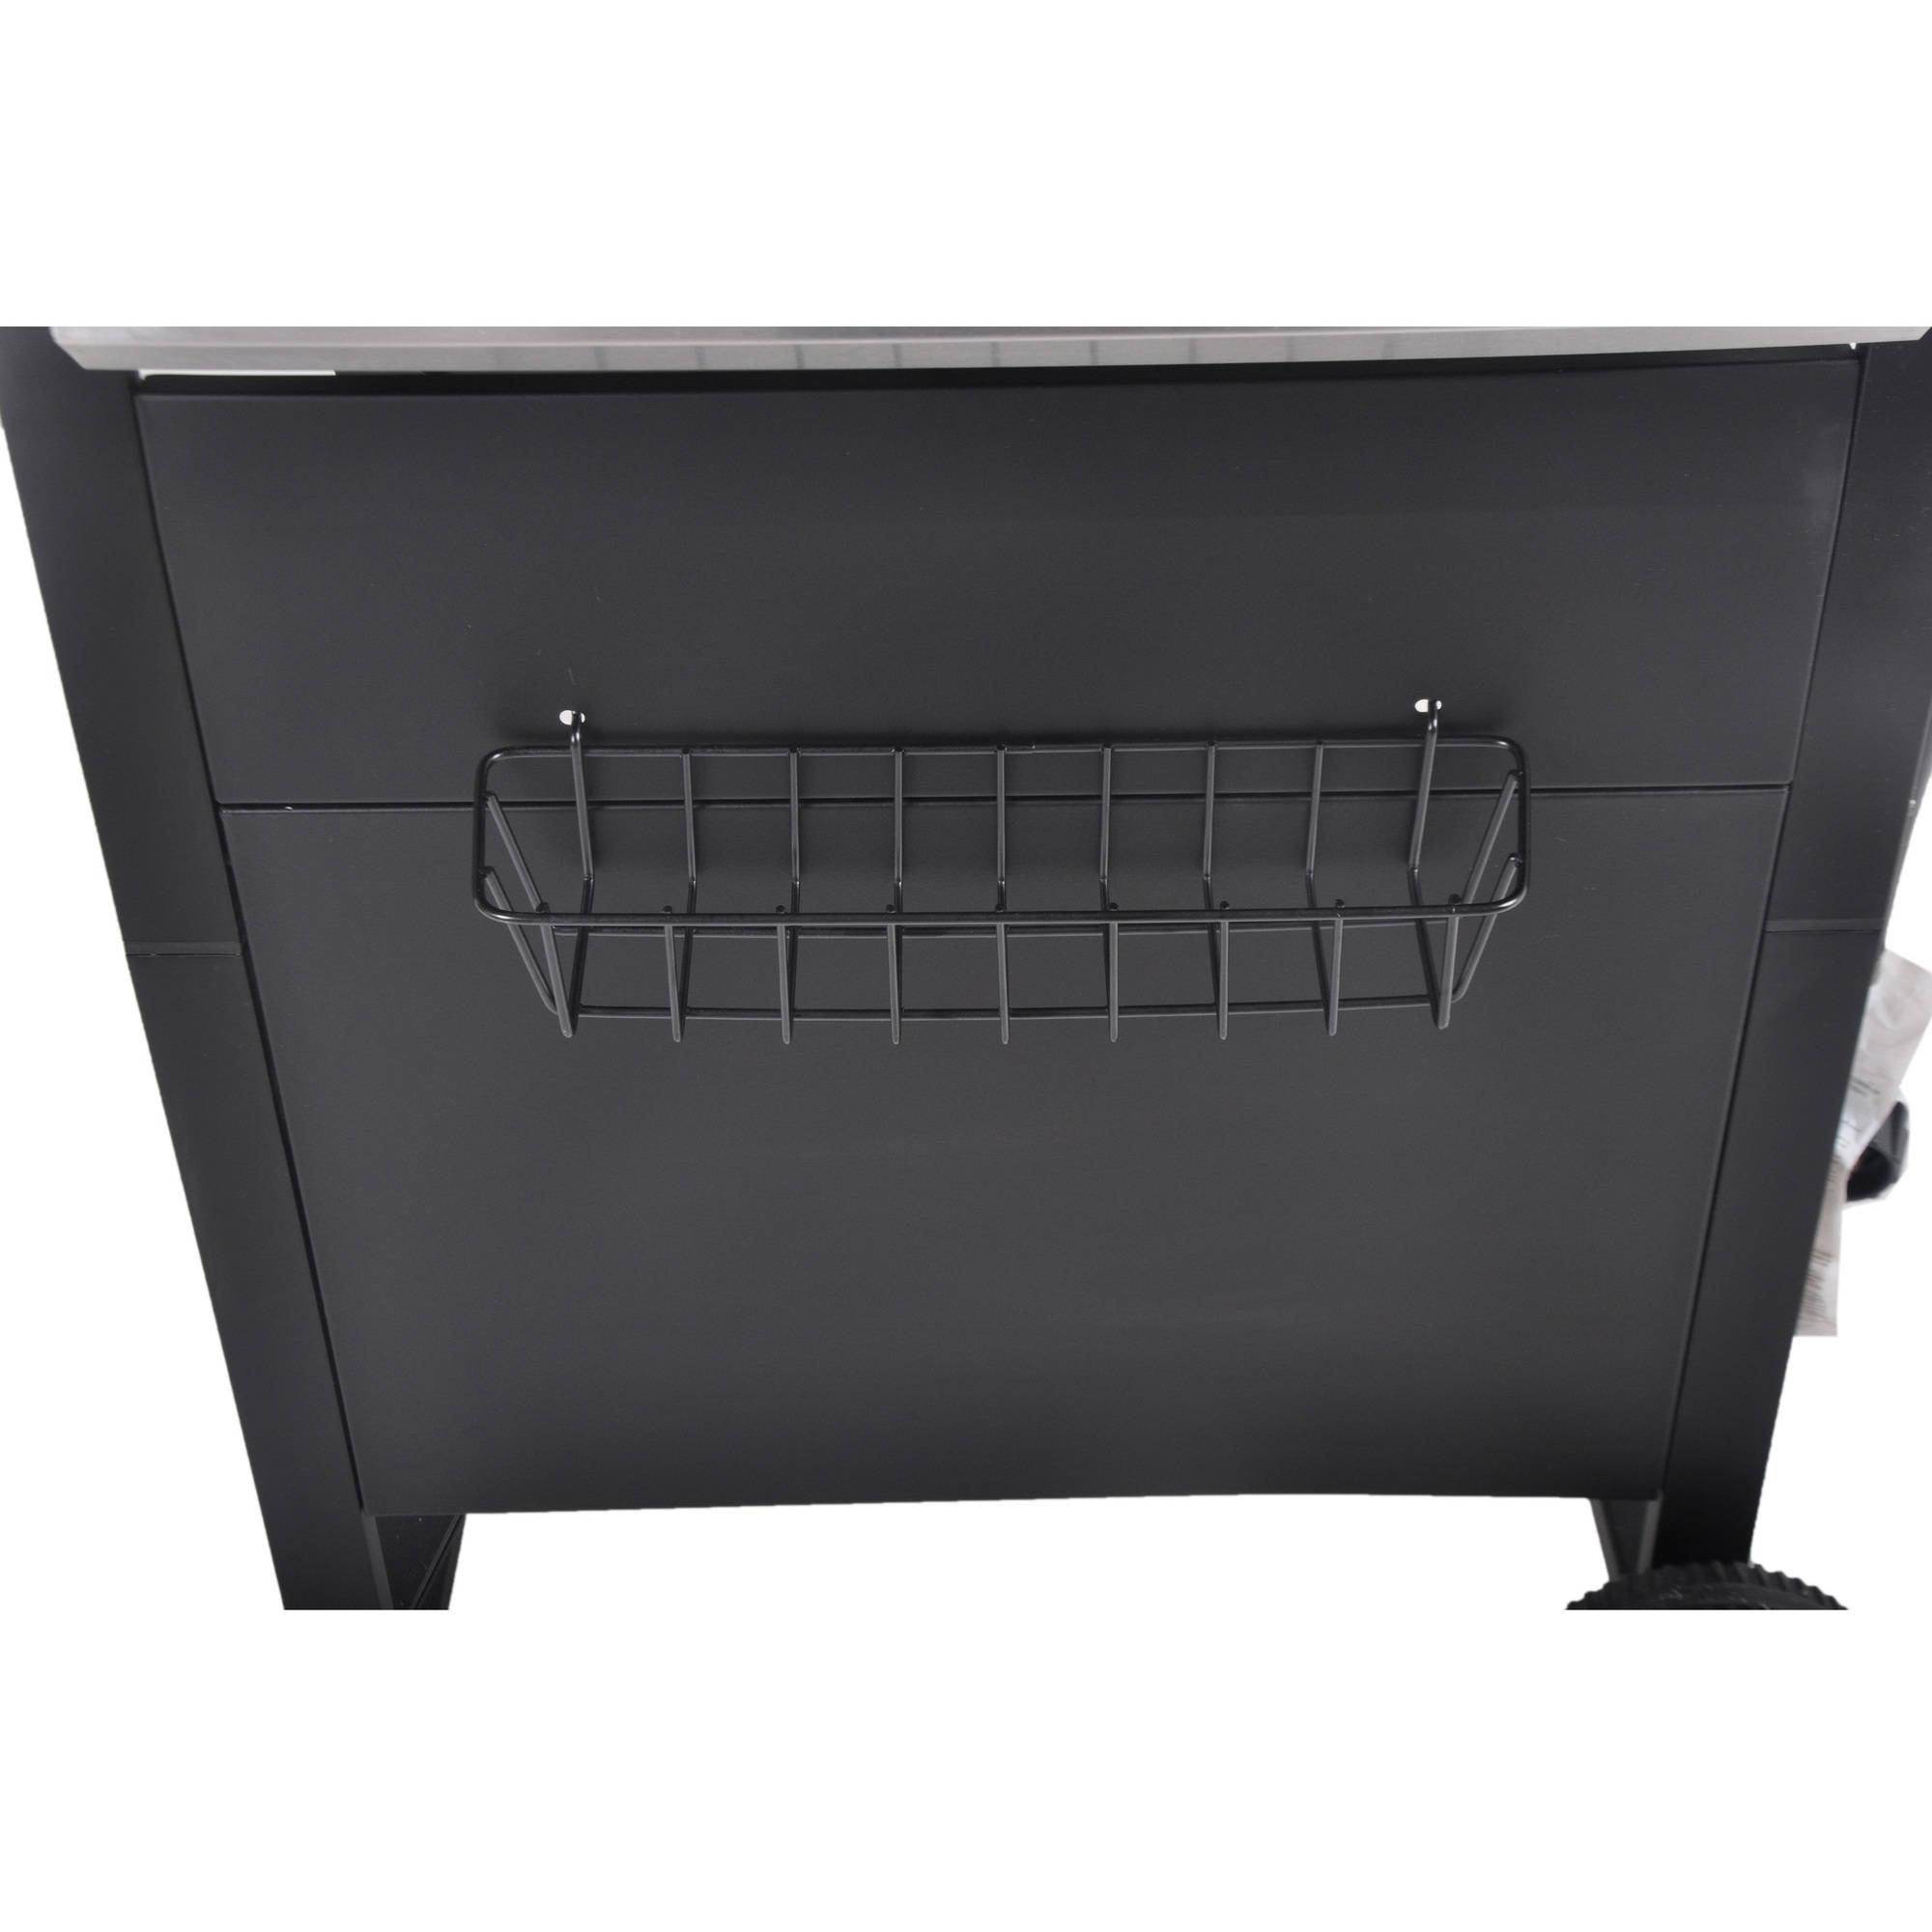 RevoAce 3-Burner Space Saver Propane Gas Grill, Stainless and Black, GBC1706W - image 3 of 11